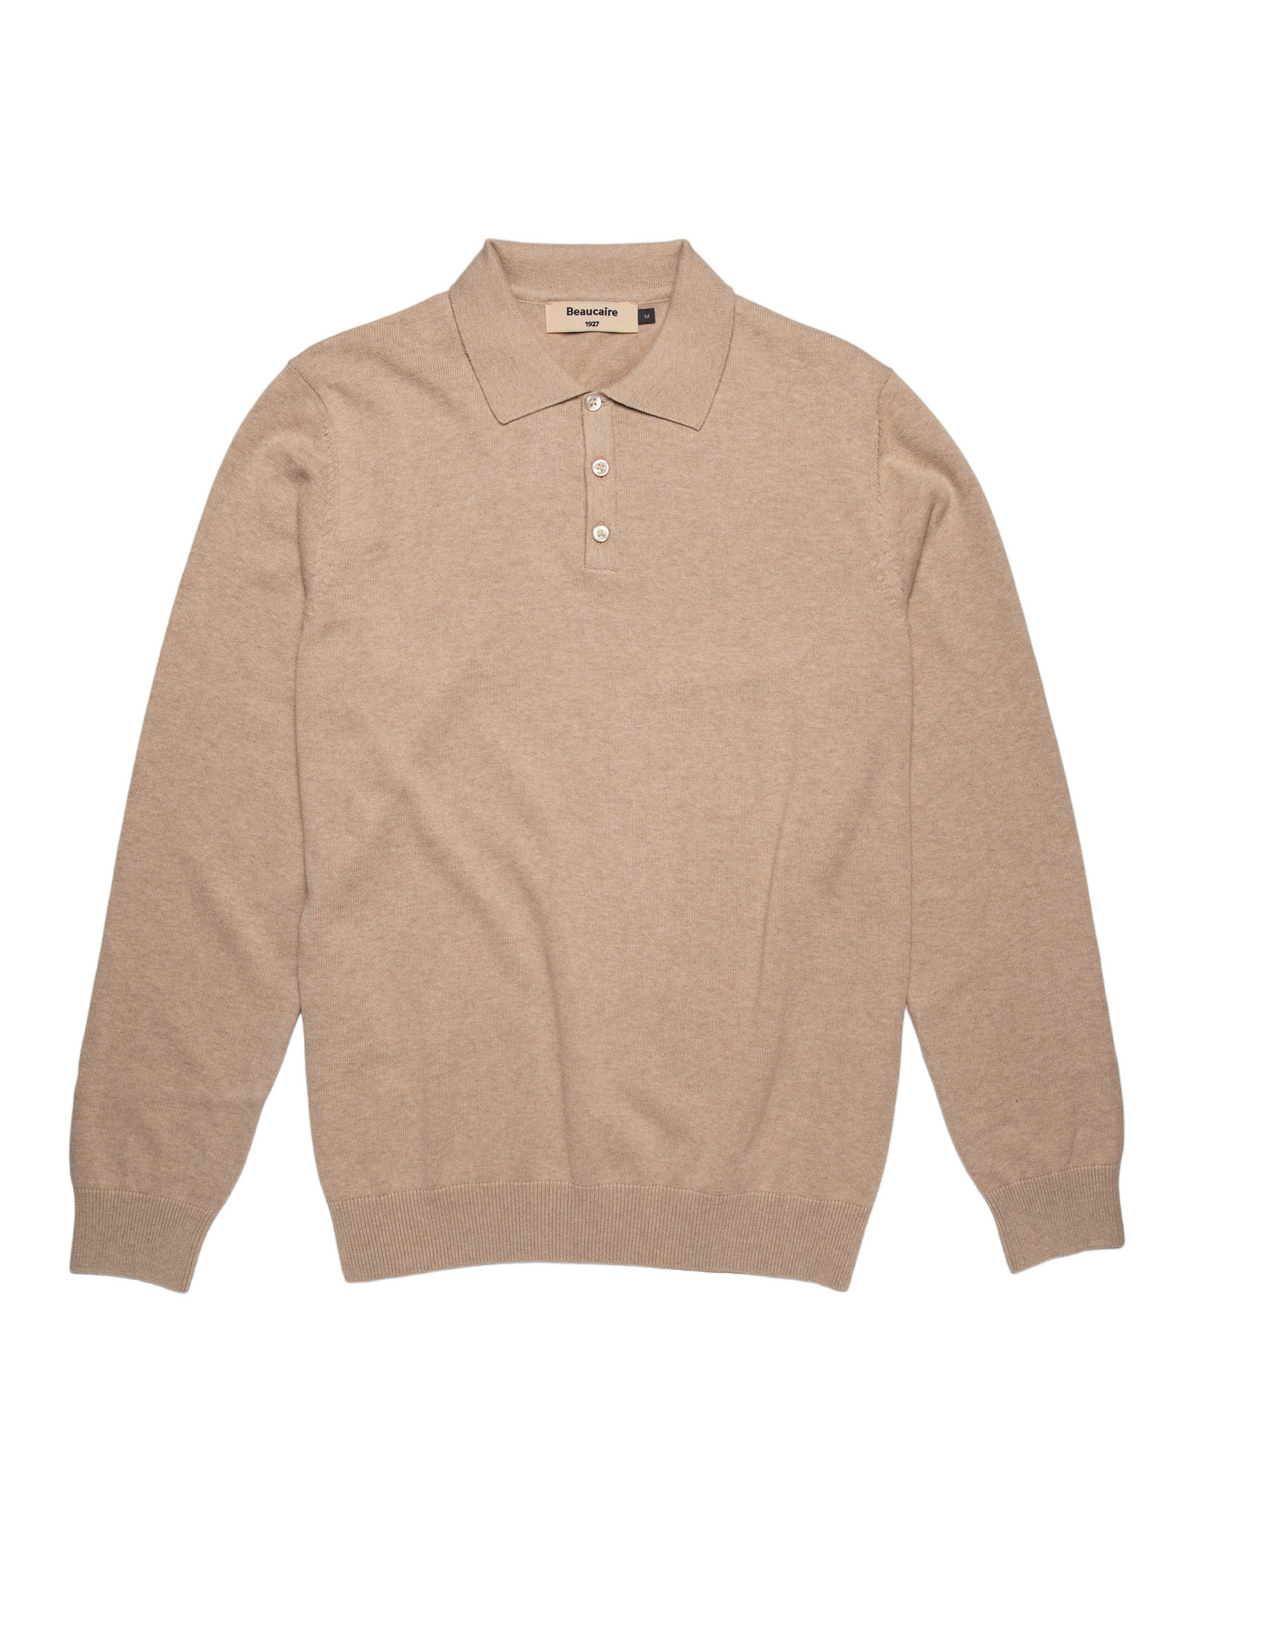 BEAUCAIRE Cotton Knitted Long Sleeve Polo SAND